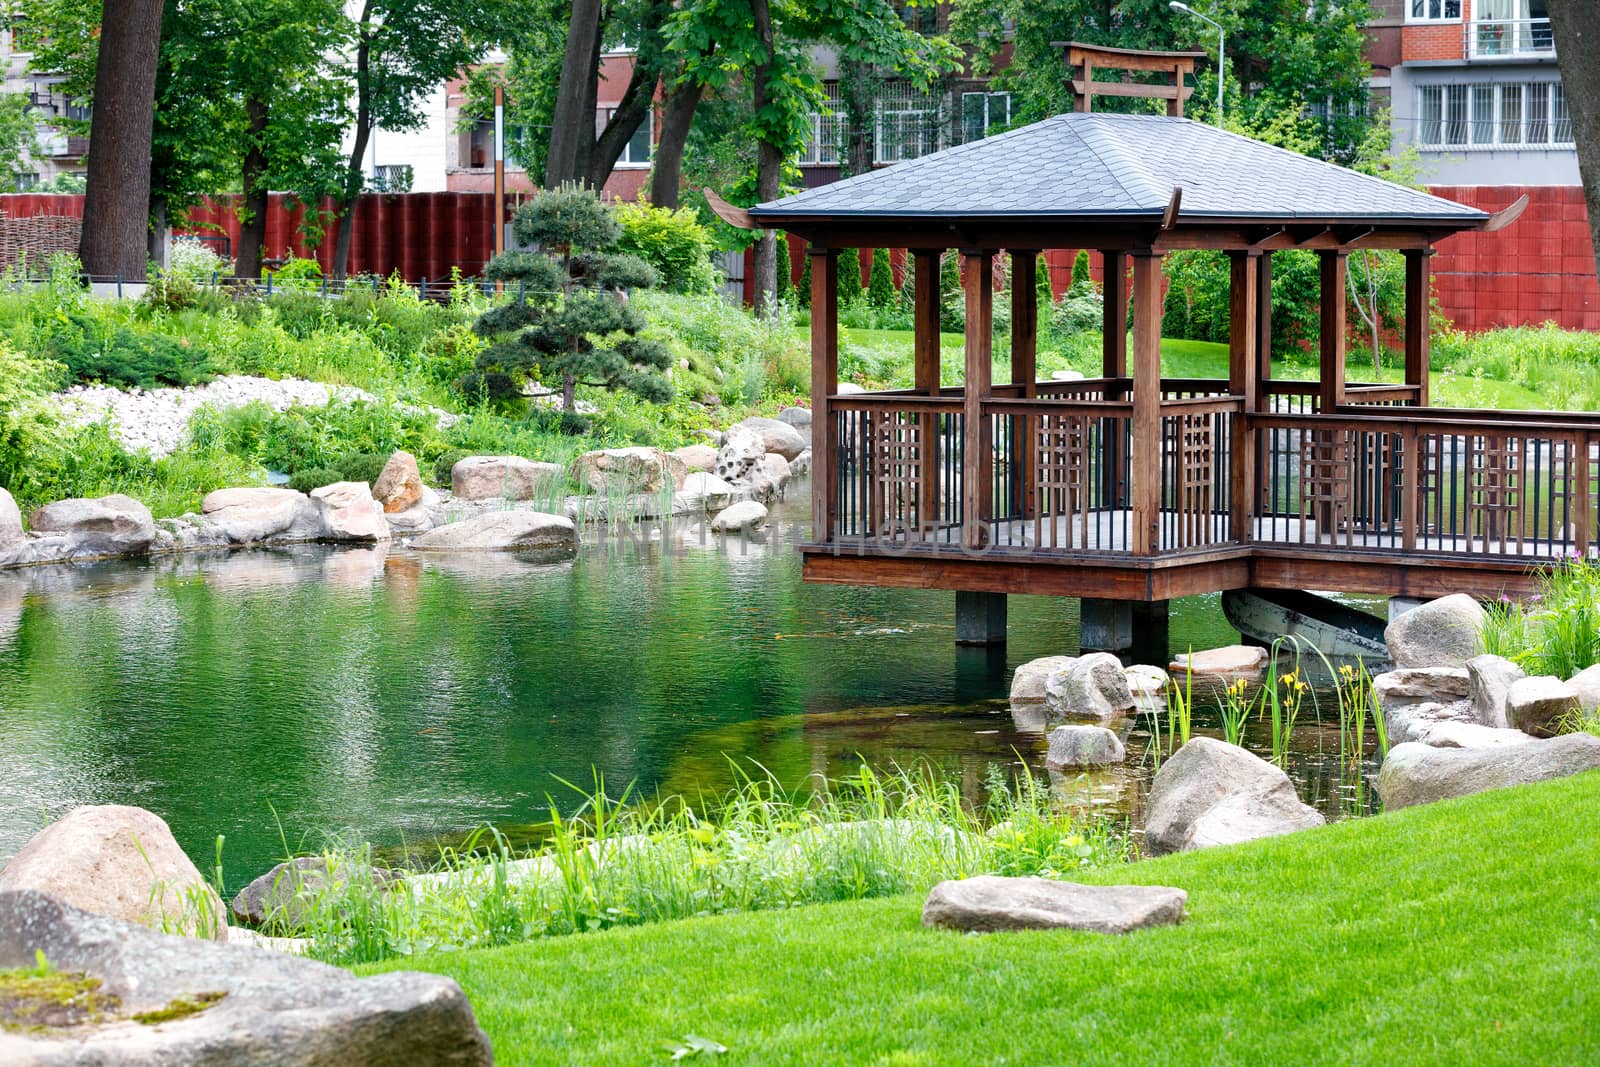 A wooden openwork gazebo on stilts stands in the middle of a forest lake, surrounded by a sheared green lawn with stone boulders on the edges under soft sunlight.